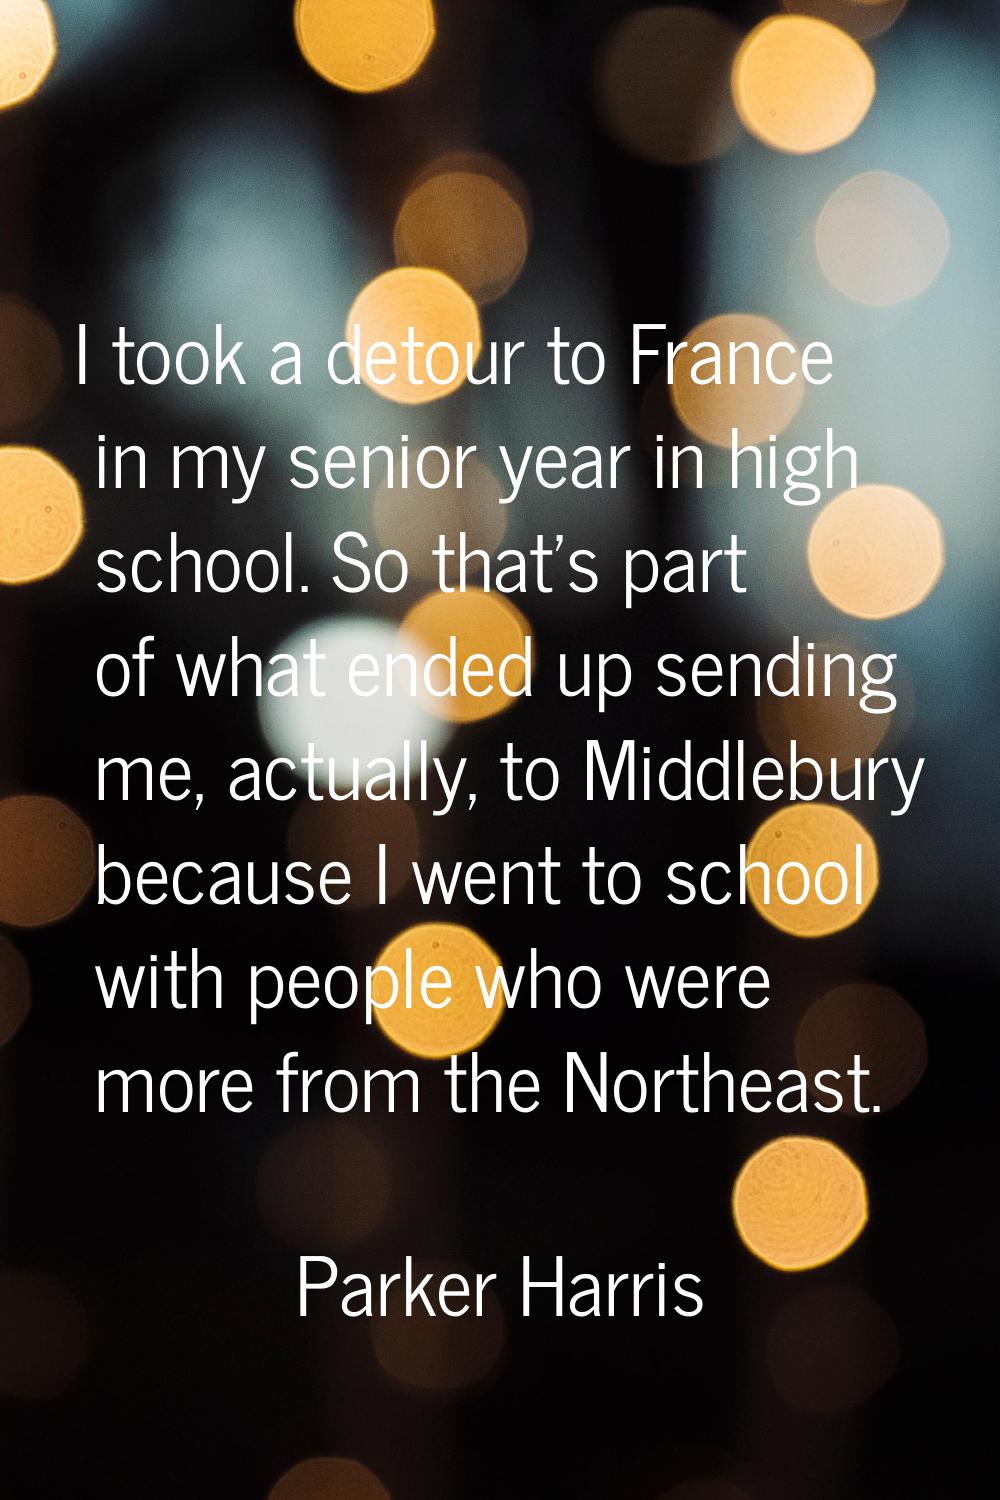 I took a detour to France in my senior year in high school. So that's part of what ended up sending